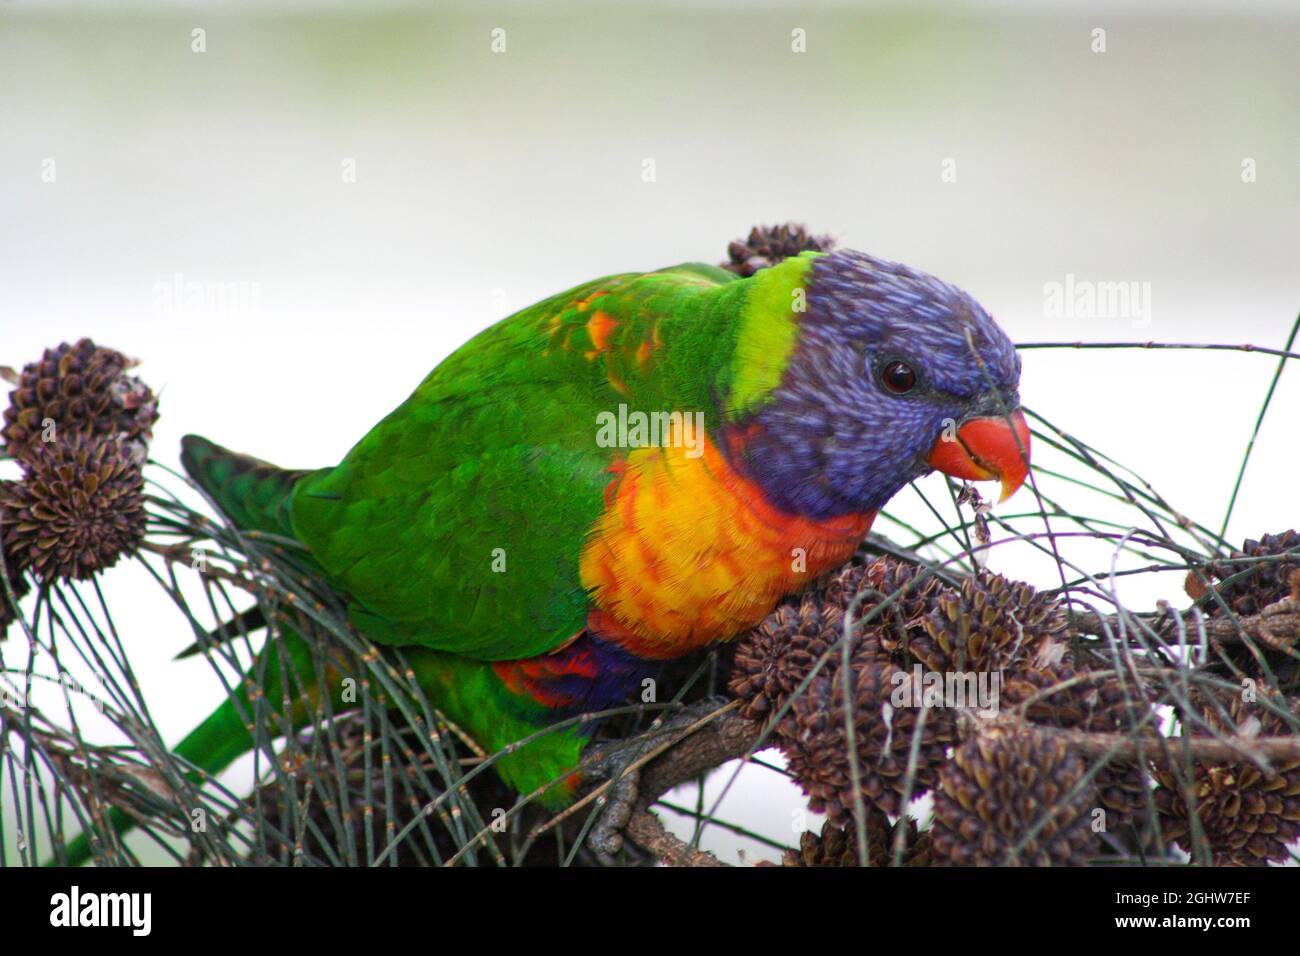 Colorful Coconut lorikeet (parrot) eating tree cones. New South Wales, Australia Stock Photo